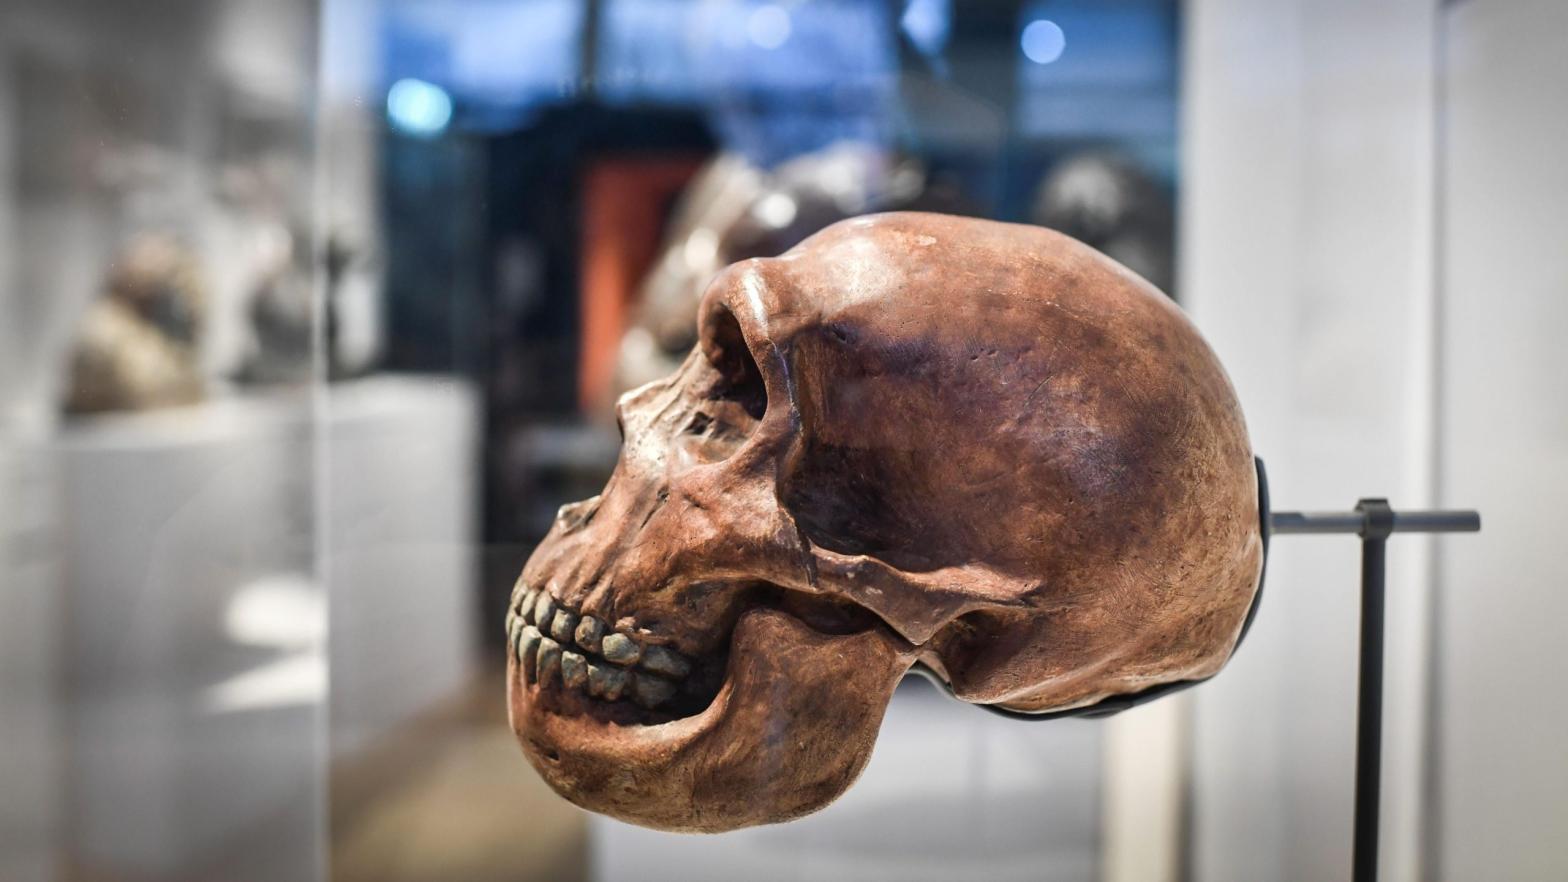 A skull on display as part of the Neanderthal exhibition at the Musee de l'Homme in Paris on March 26, 2018.  (Photo: STEPHANE DE SAKUTIN/AFP, Getty Images)